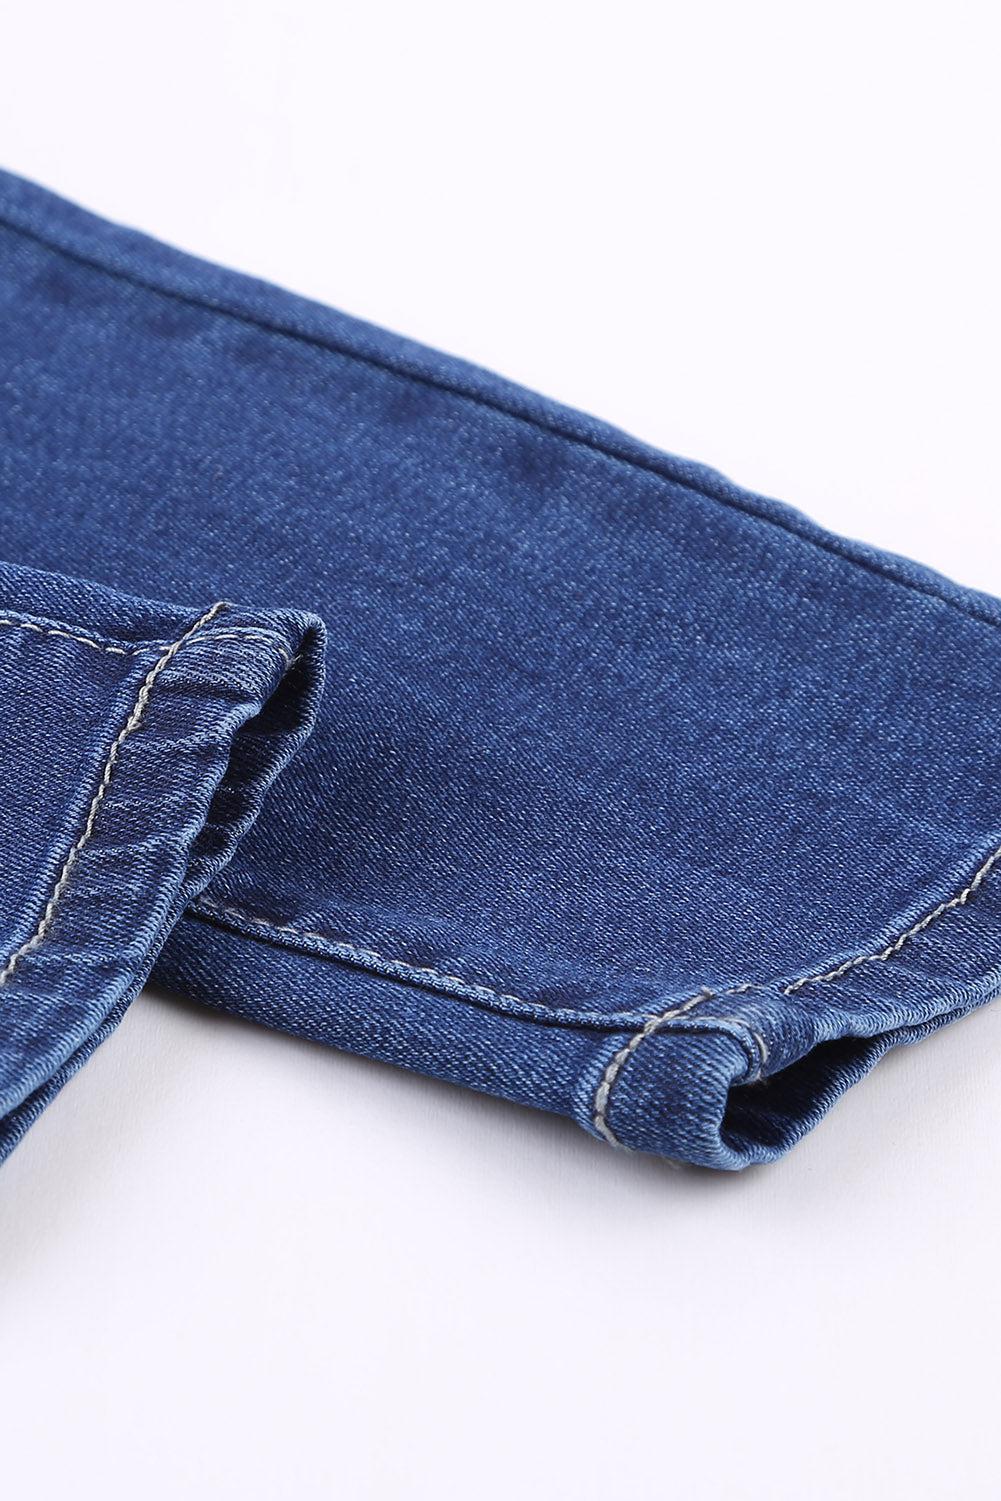 What You Want Button Fly Pocket Jeans-JEANS 0-16-[Adult]-[Female]-2022 Online Blue Zone Planet